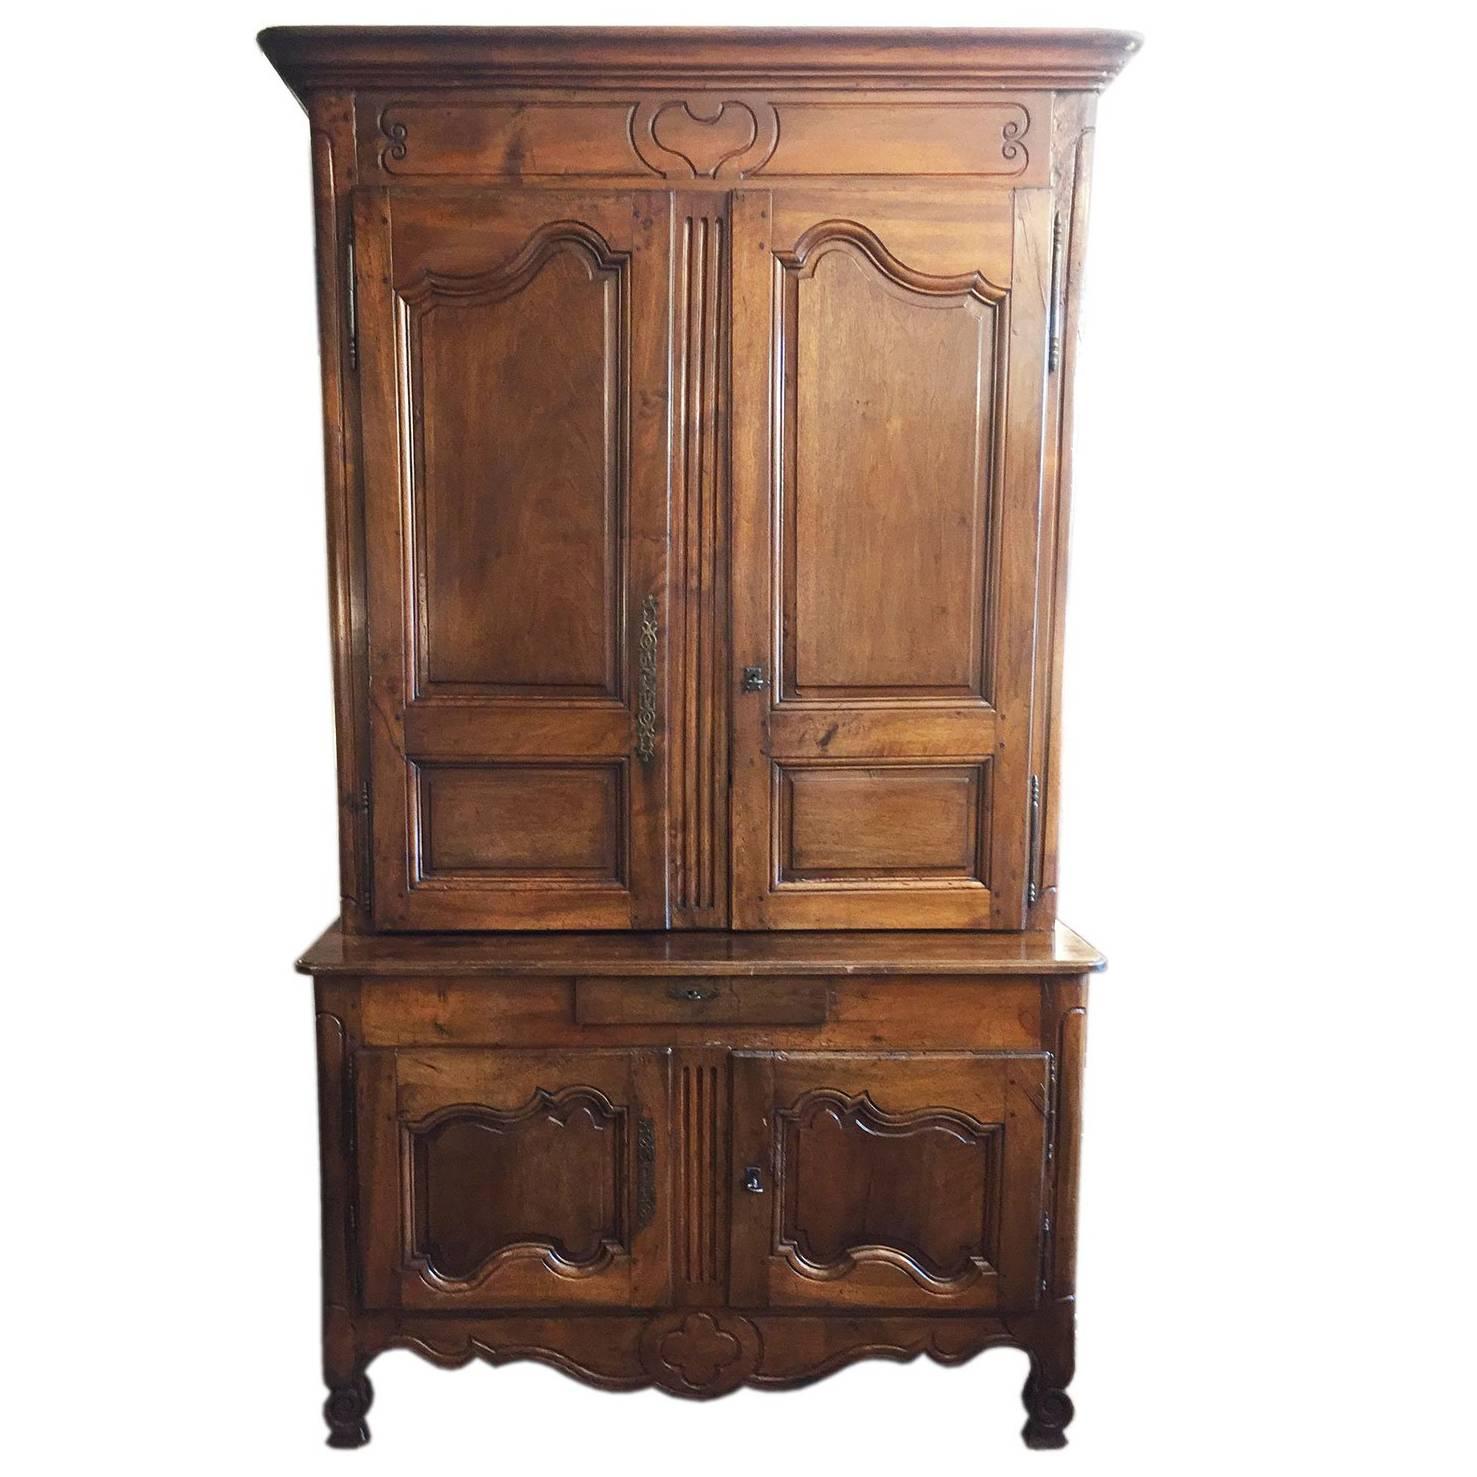 Late 18th century French walnut two-tiered cabinet,   with the top cabinet being shallowing than the bottom cabinet, an antique hand-carved two-door buffet from  Provence, total height 101.19 inches, 257 centimeters. 
Large Louis XV chestnut buffet